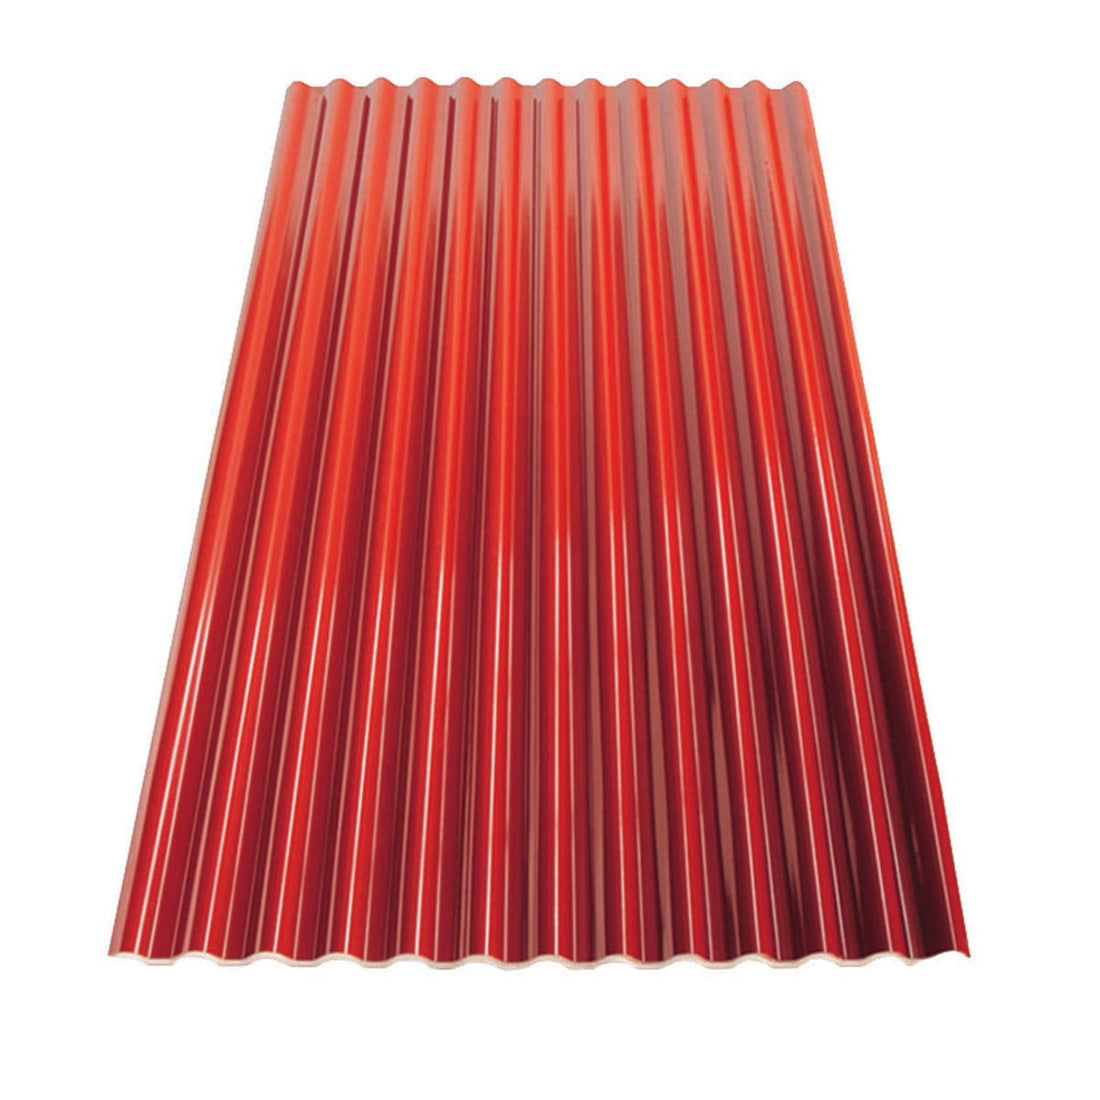 SIENA RED ECOLTHERM SHEET 2X1.104